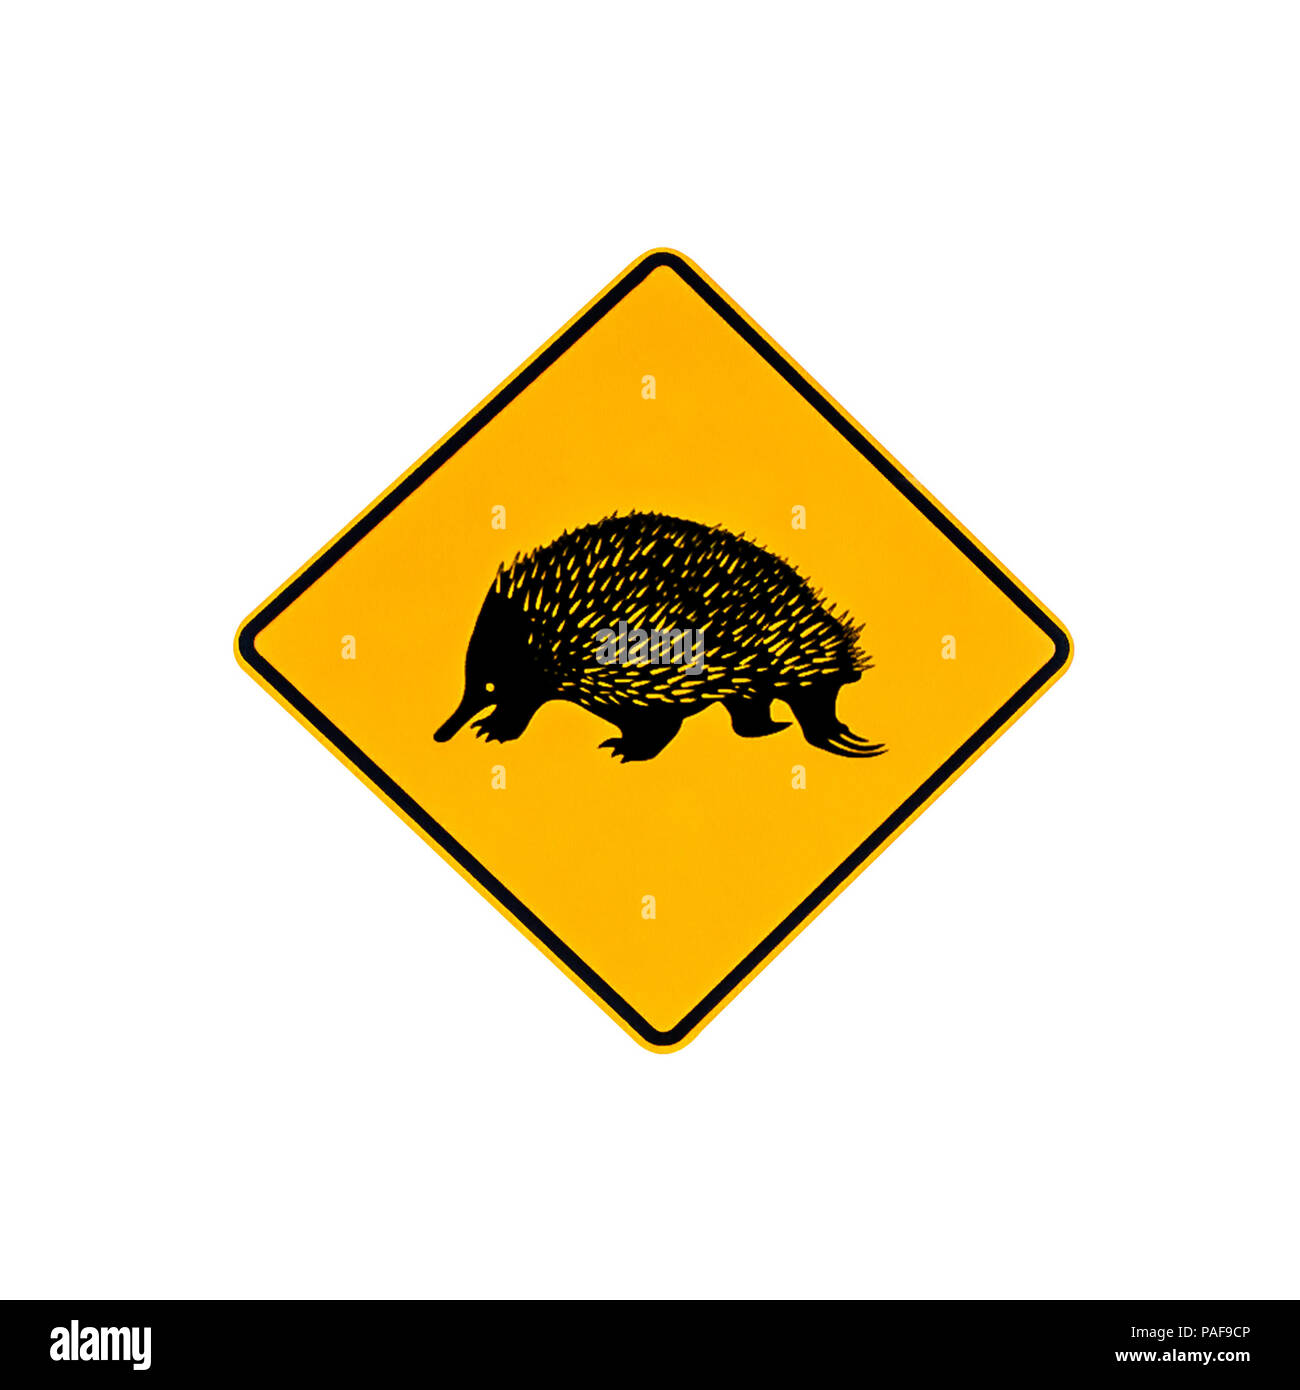 Australian wildlife warning road sign for echidna on the road and highways of Australia. Isolated on white. Stock Photo